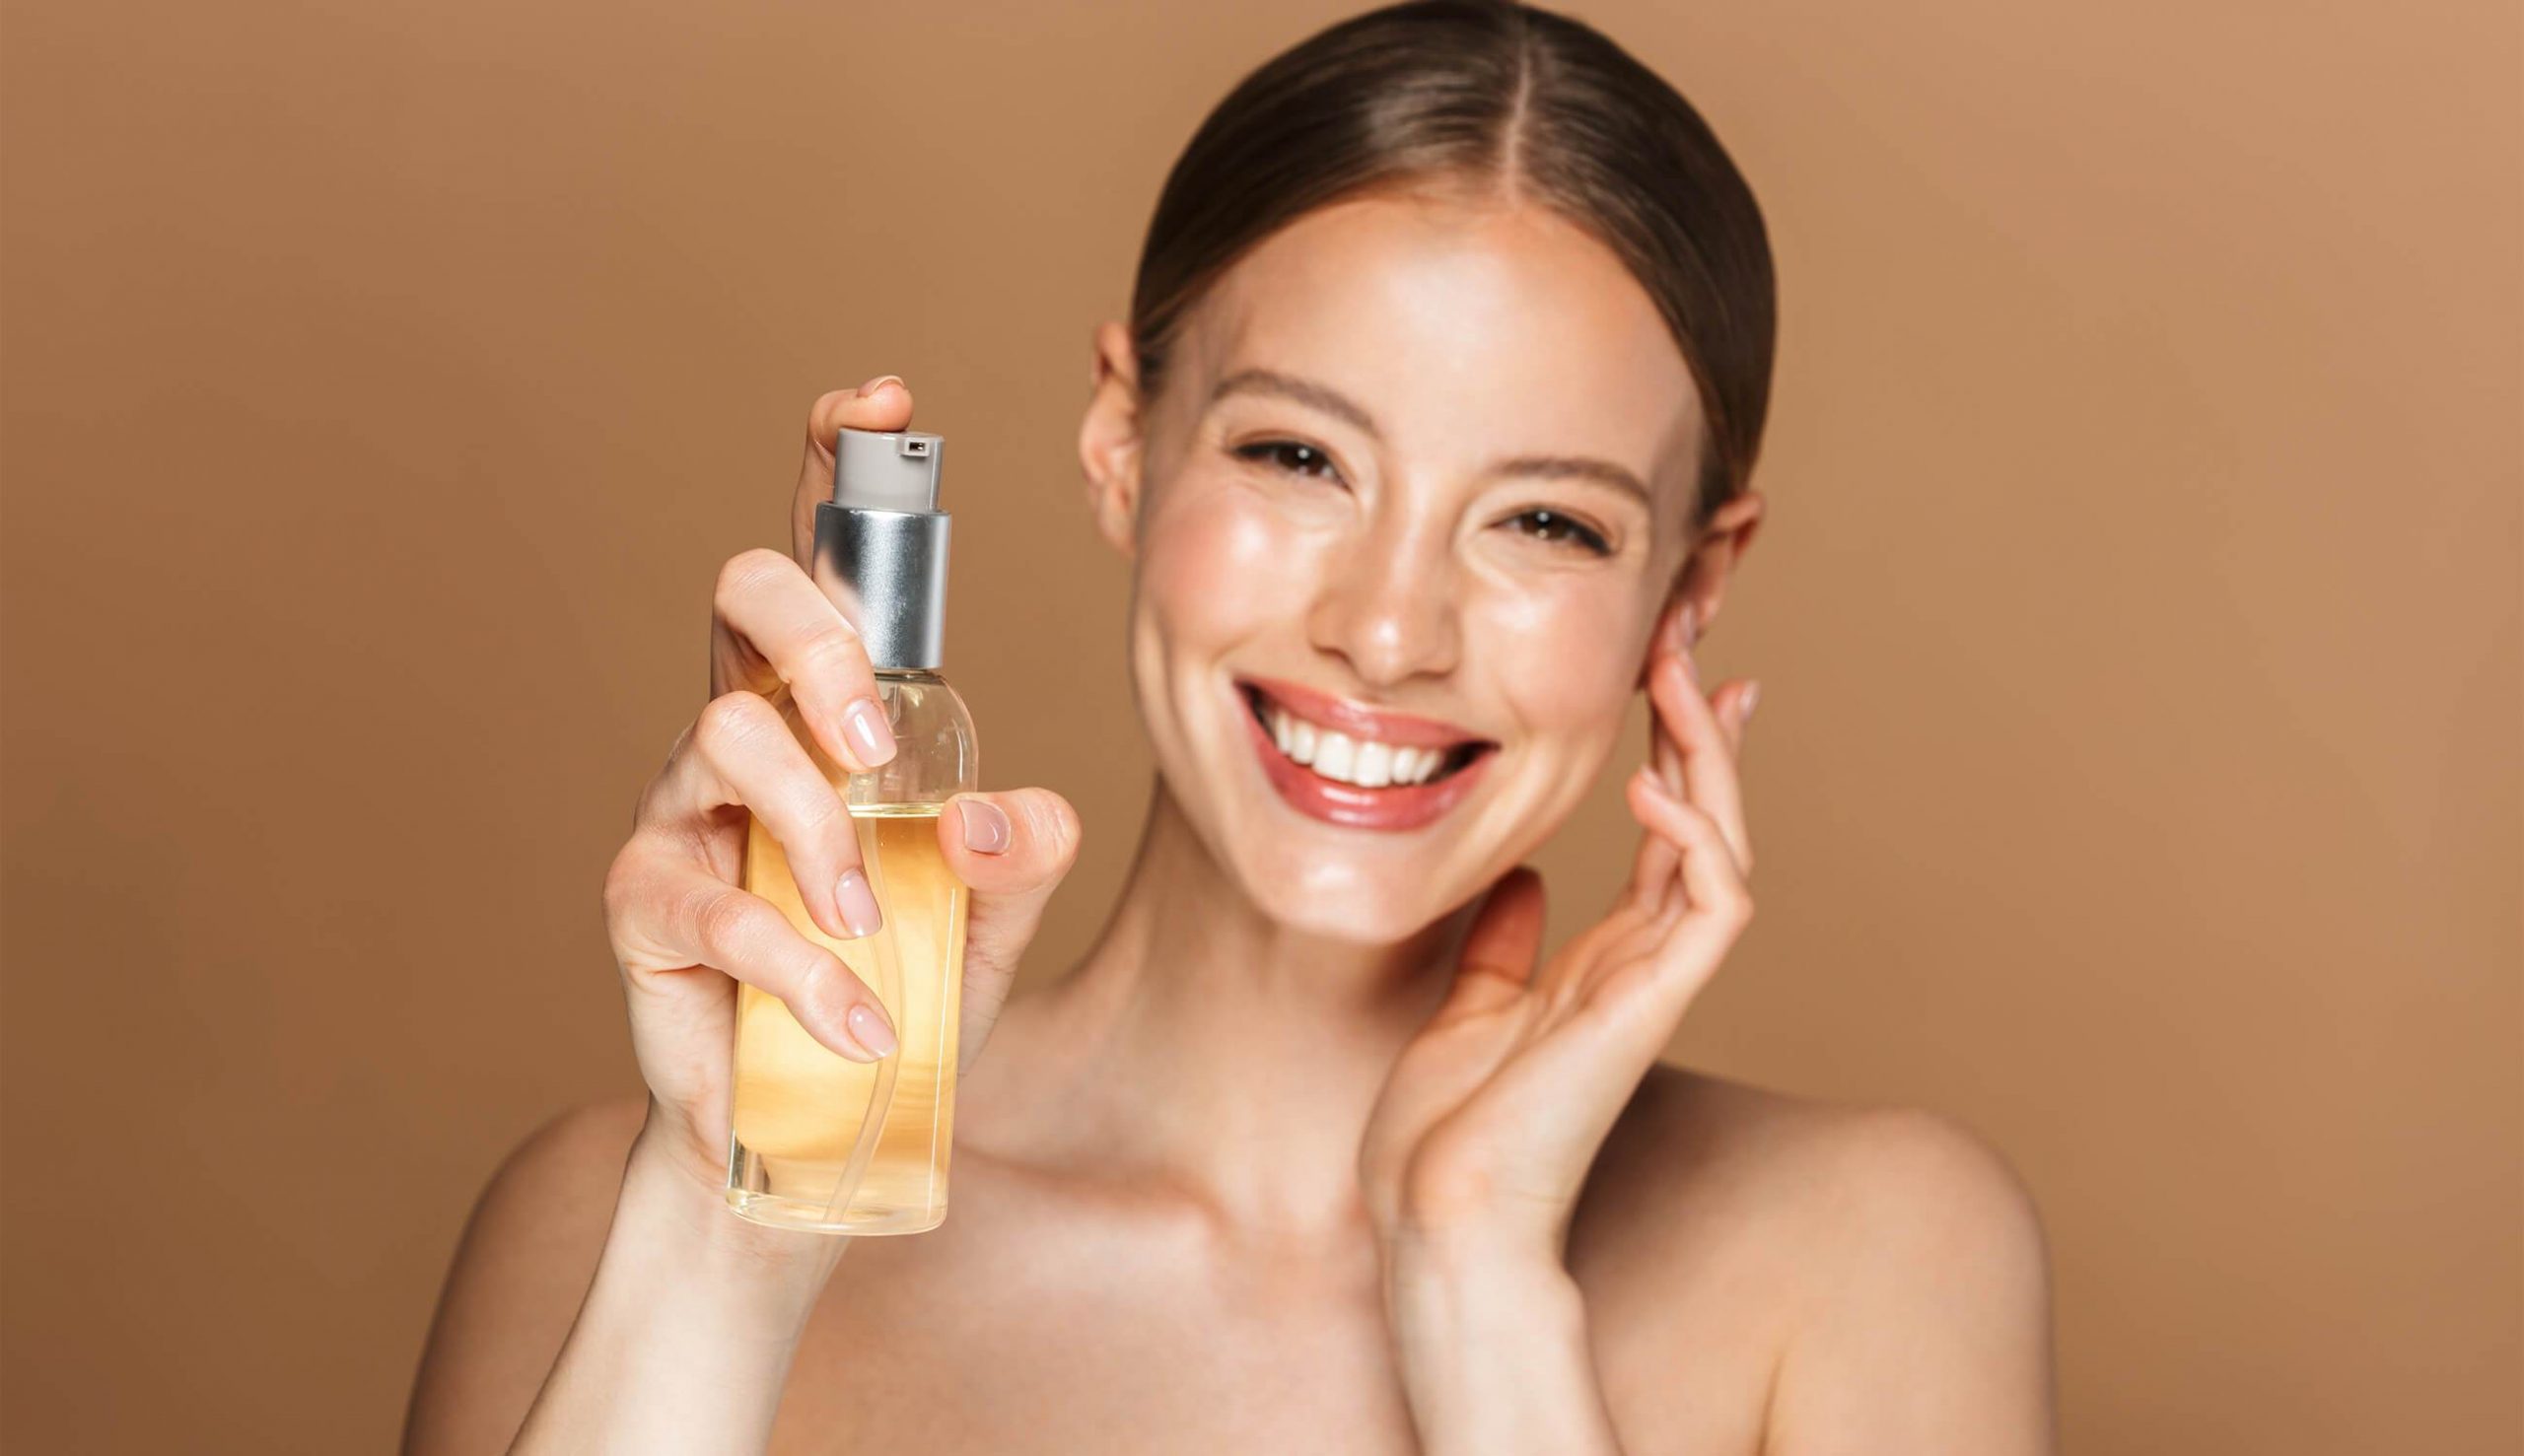 What are the reasons for using facial cleansing oil?